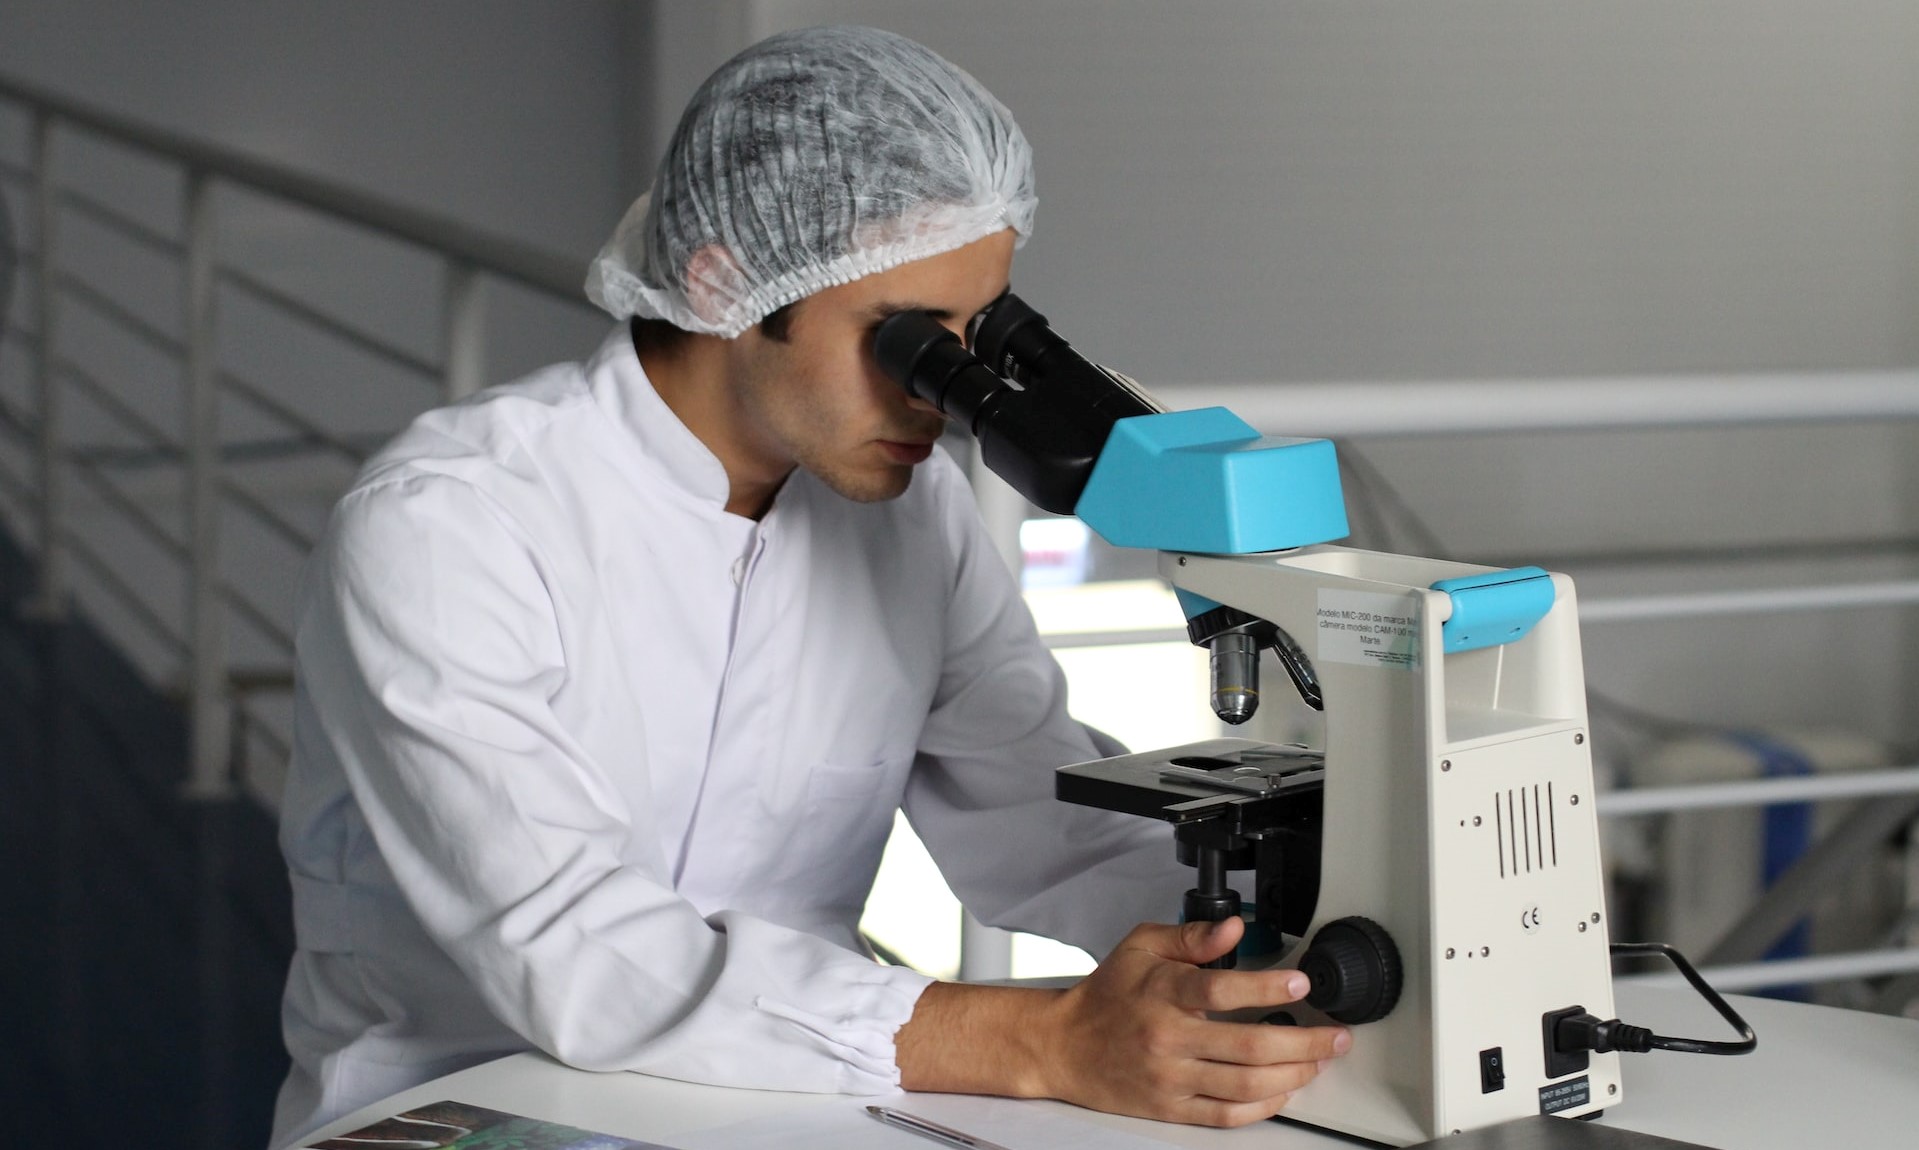 Medical researcher examines sample under microscope